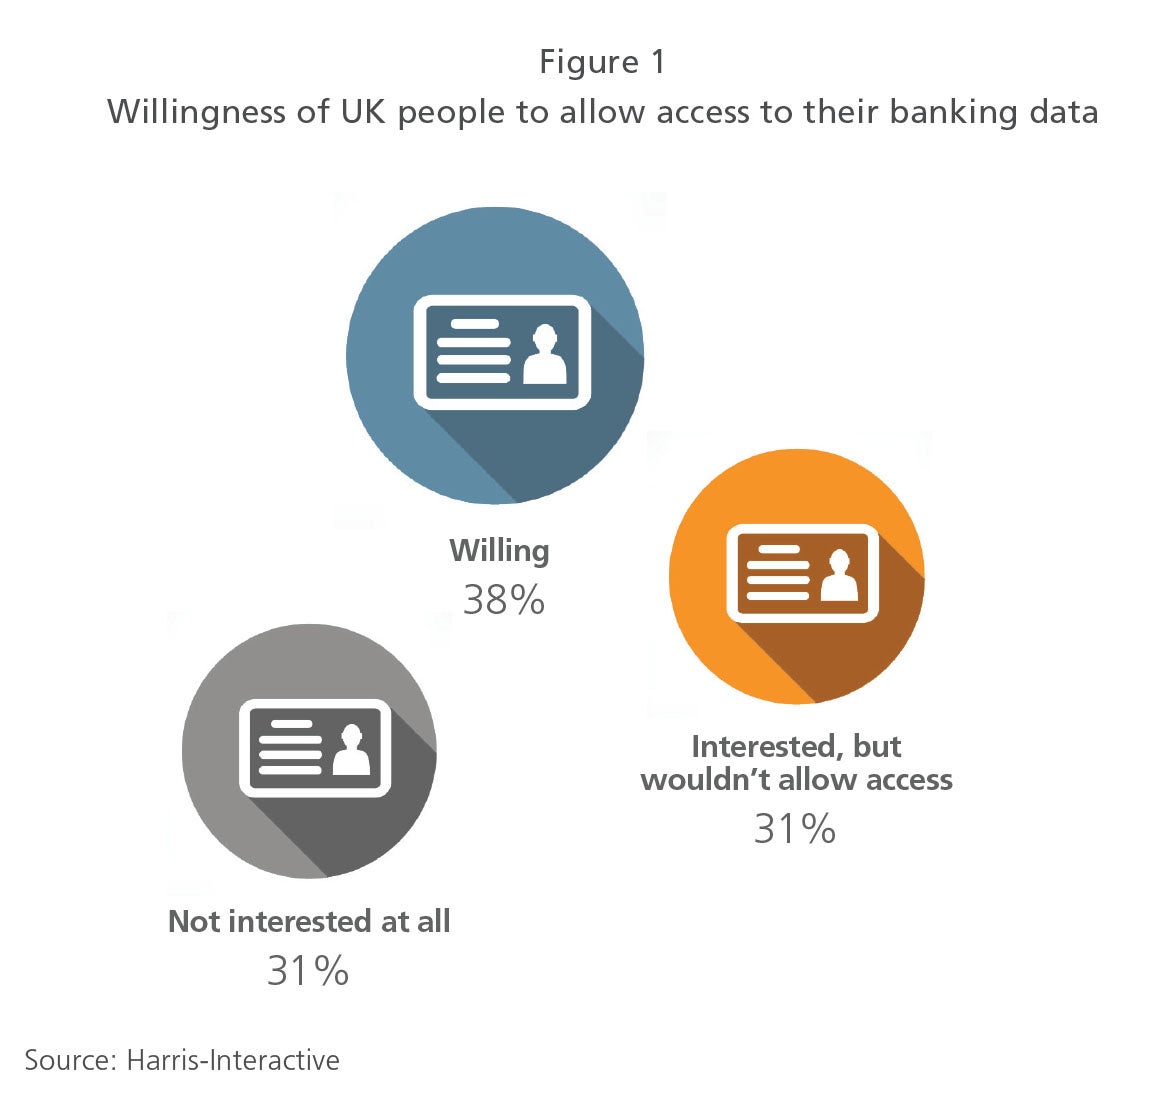 Willingness of UK people to allow access to their banking data